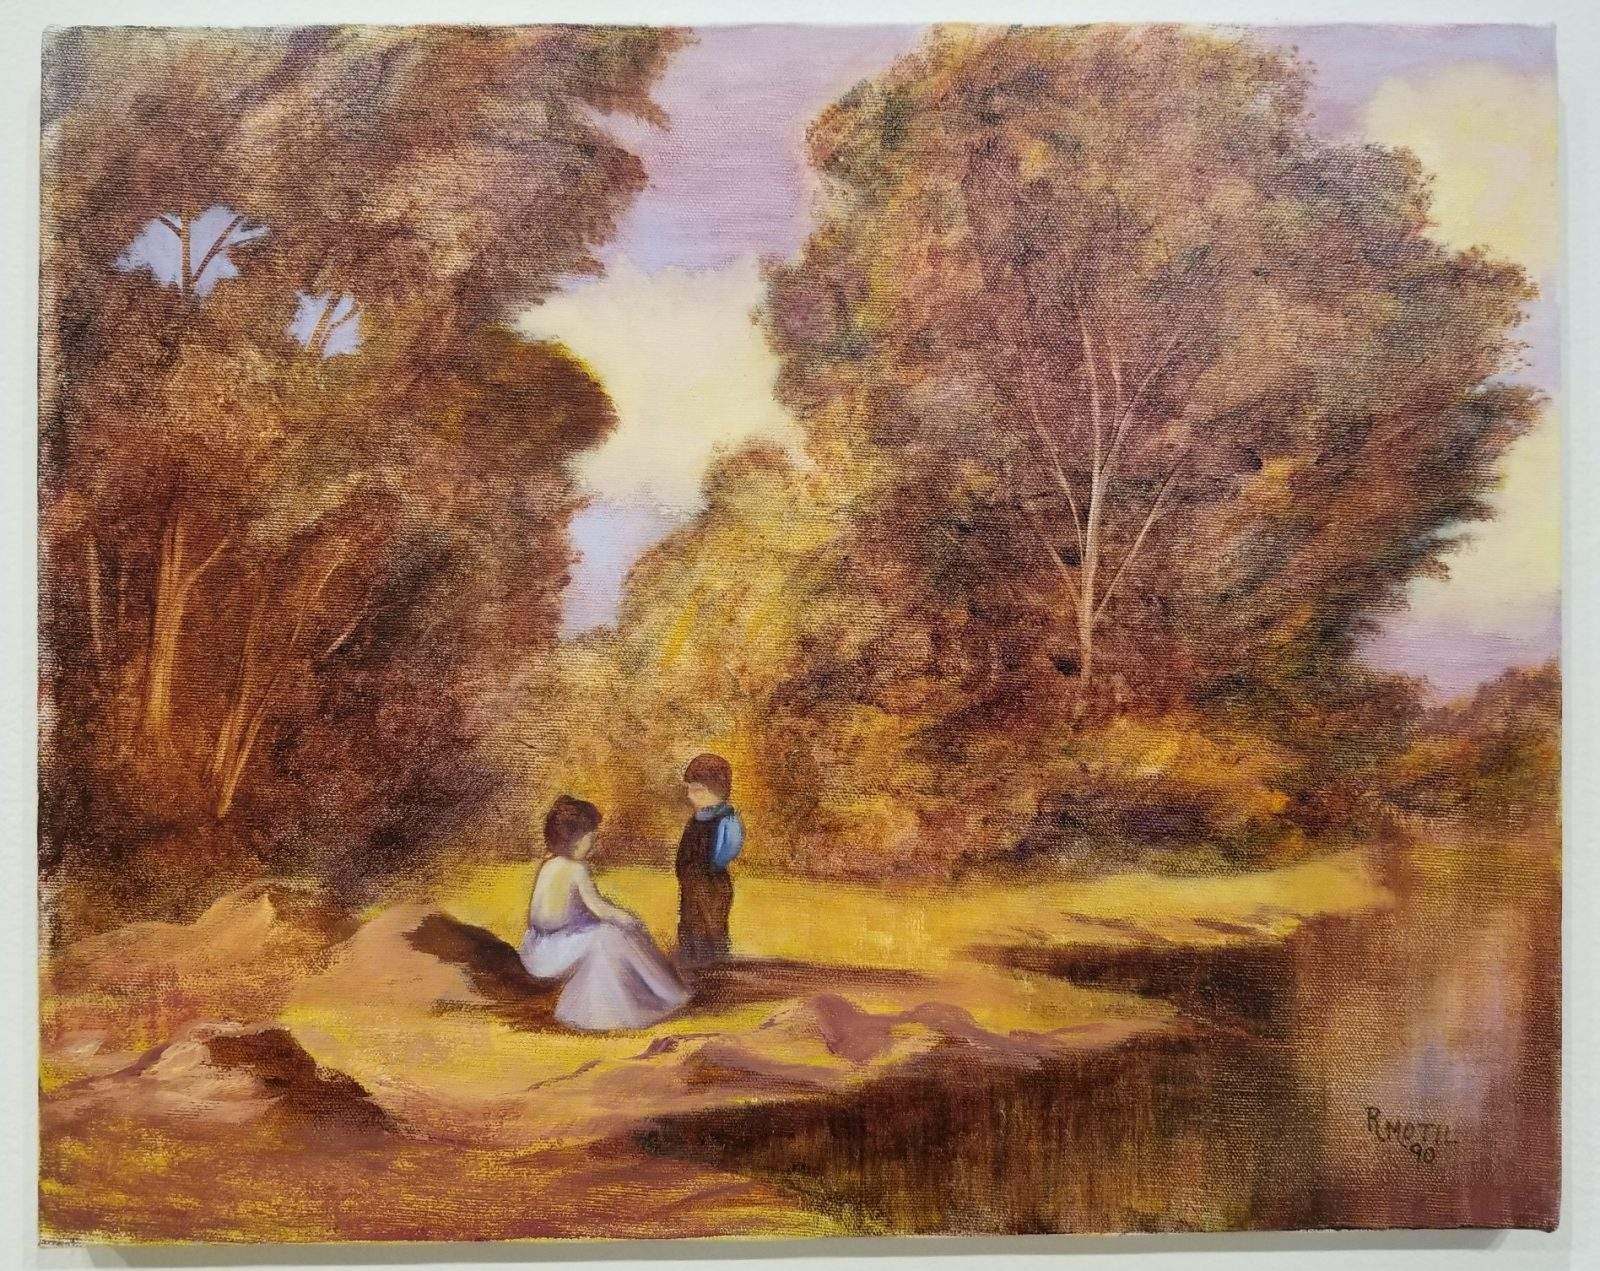 Painting by R. Motil that features a woman and a young boy sharing a somber moment alongside a lake.